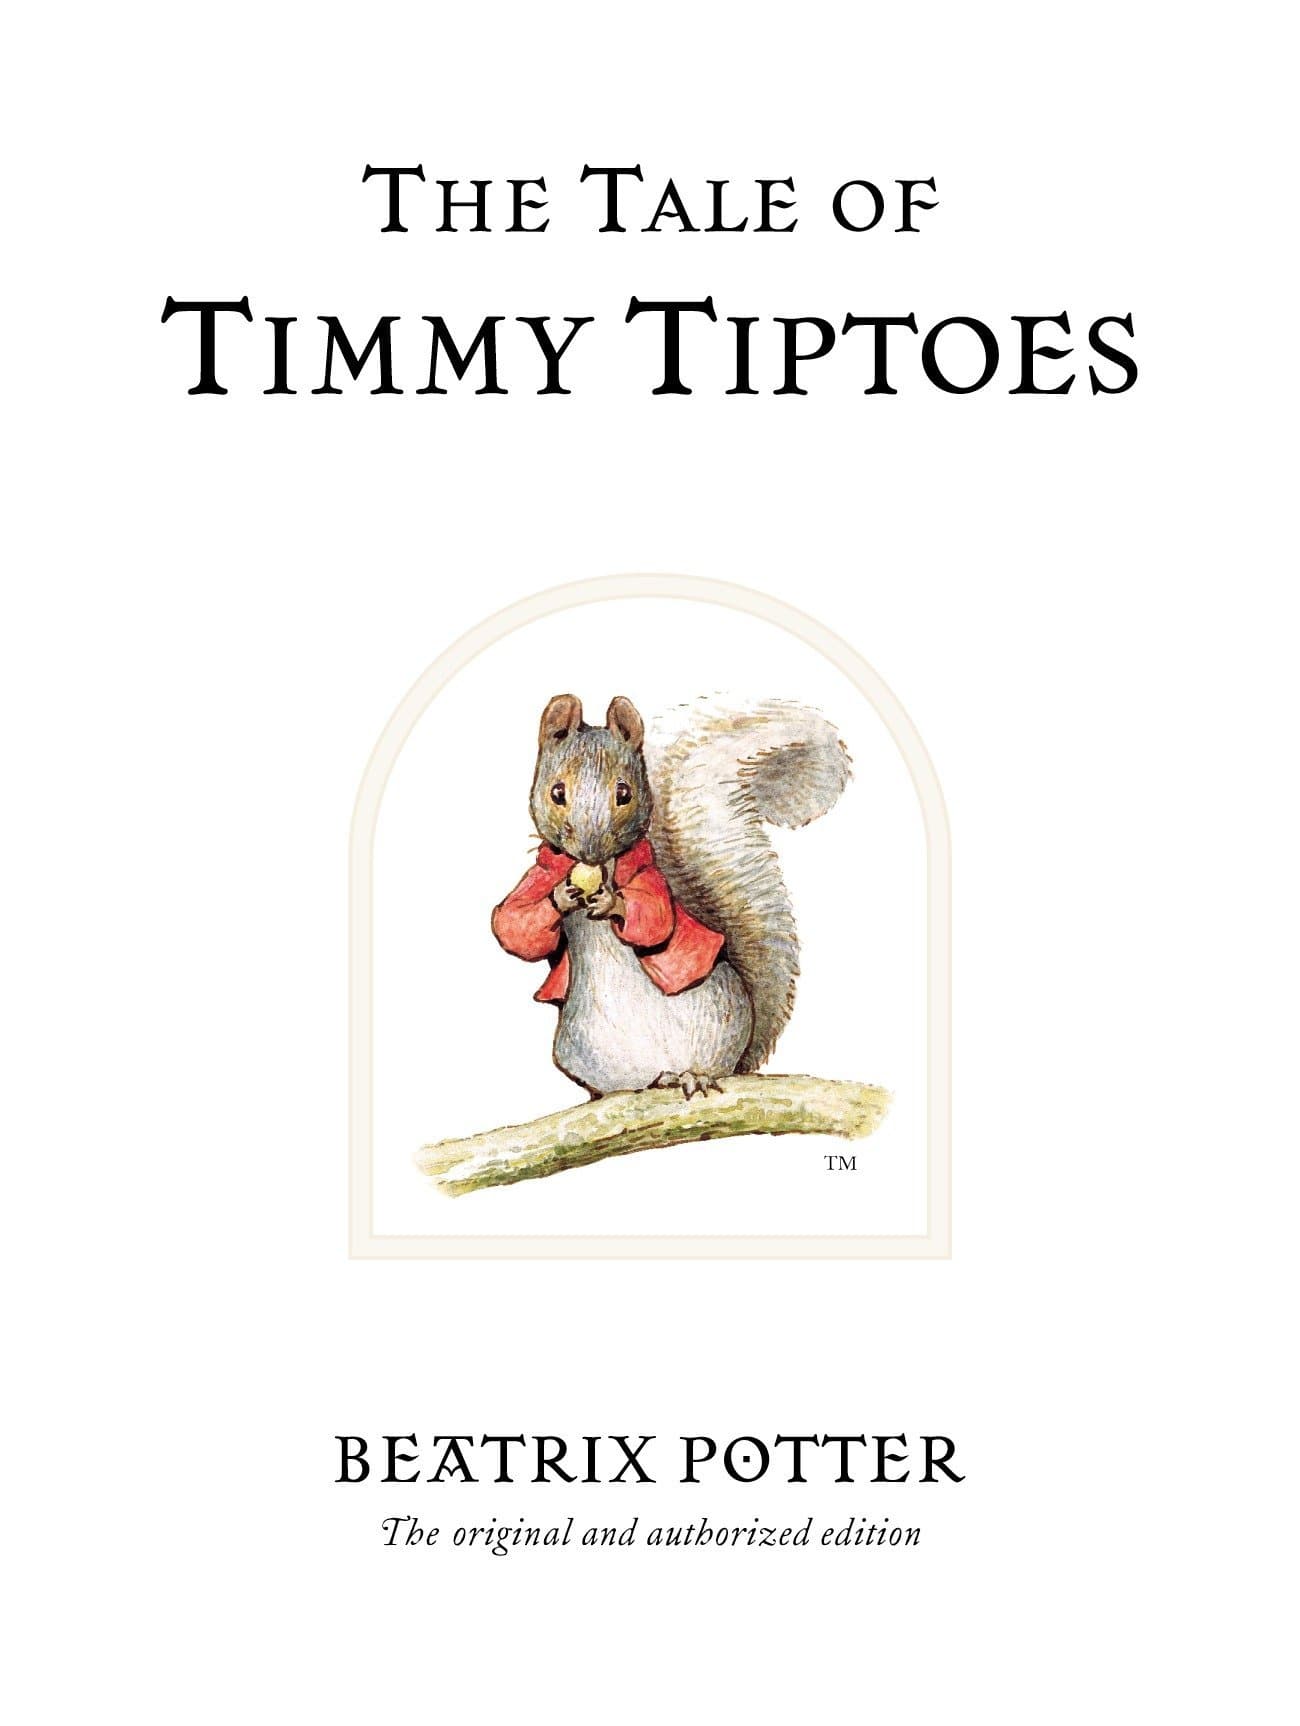 IMG : The Tale of Timmy Tiptoes